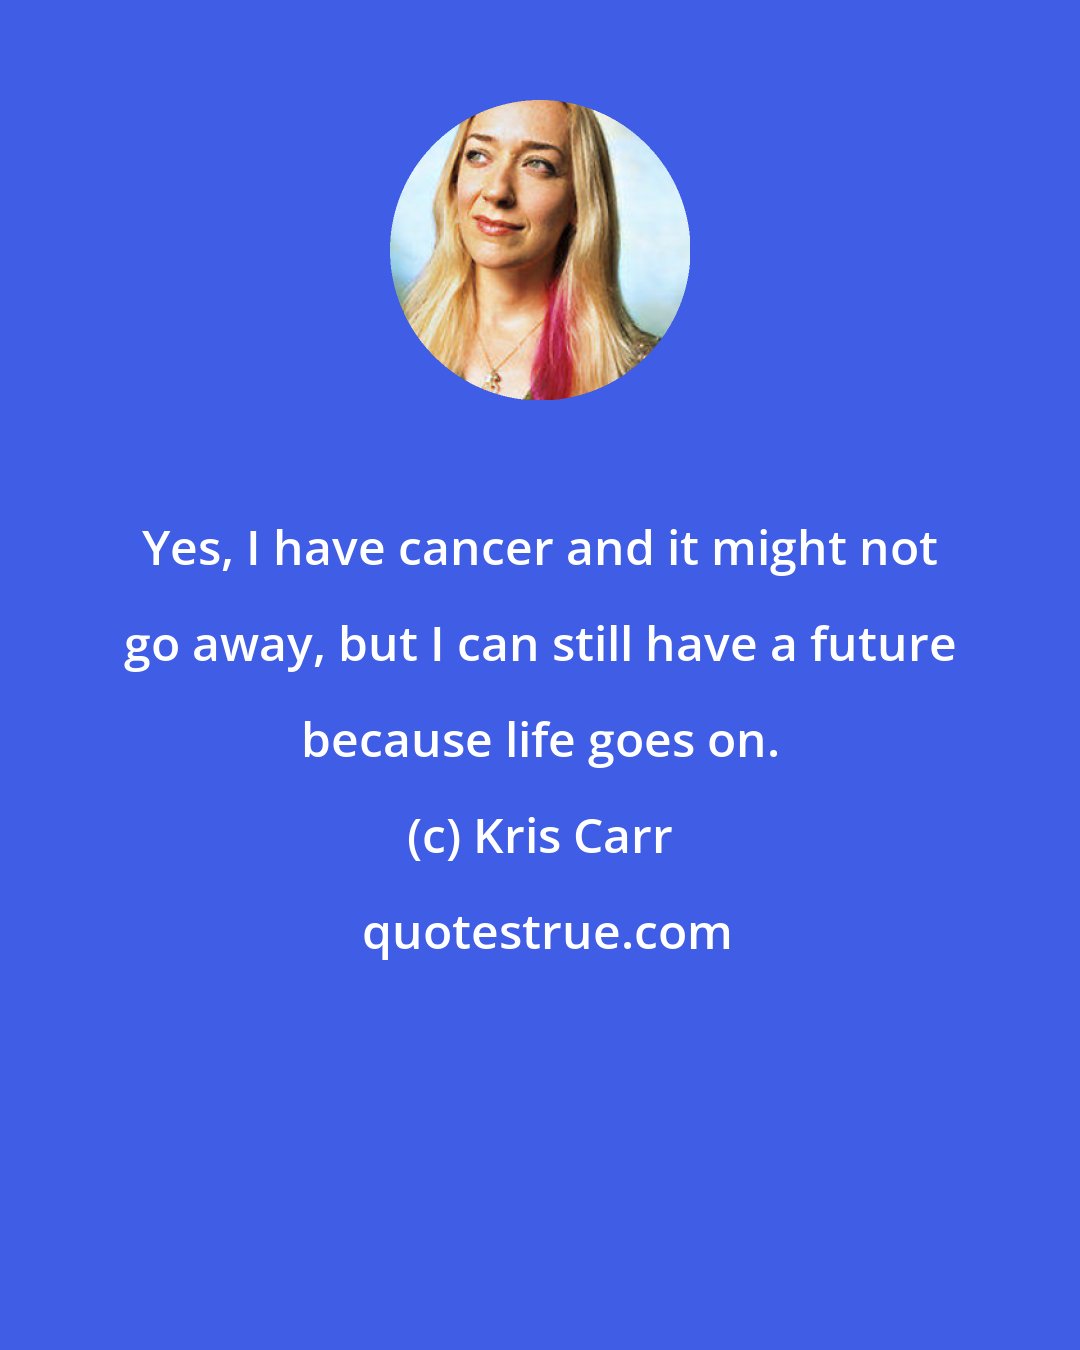 Kris Carr: Yes, I have cancer and it might not go away, but I can still have a future because life goes on.